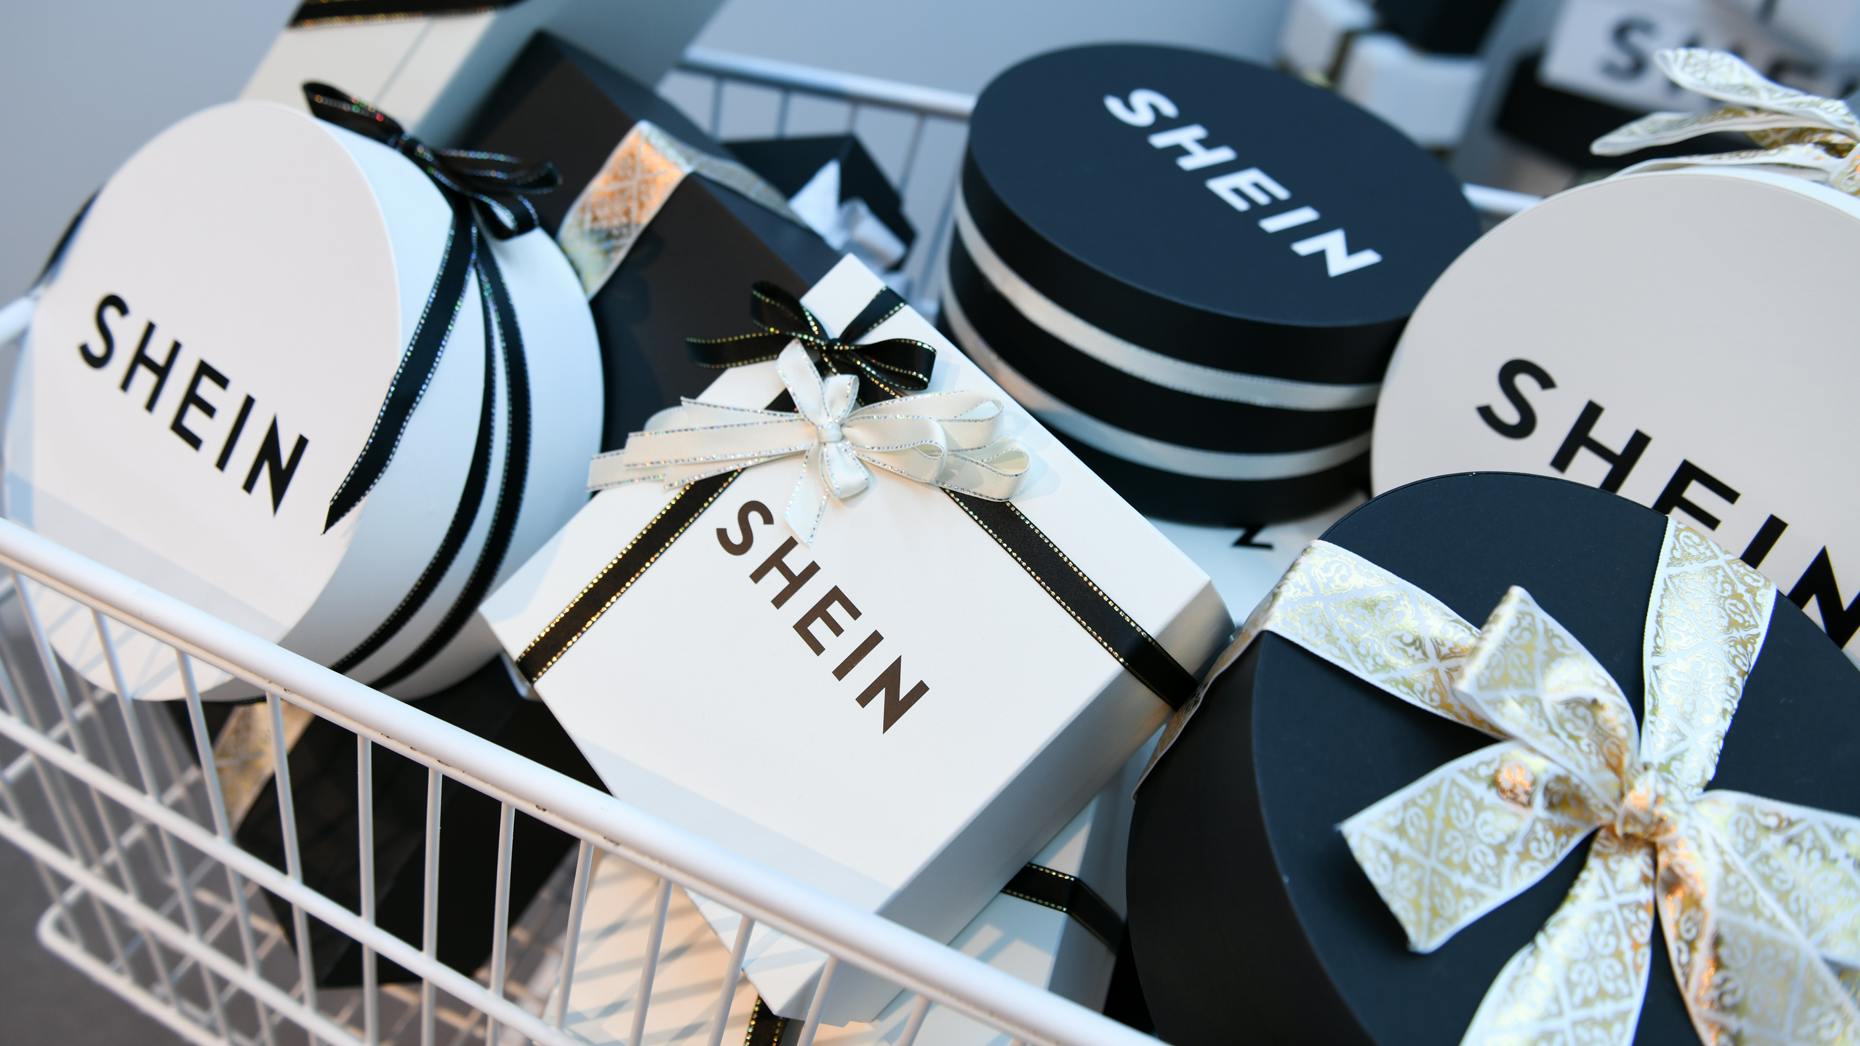 Shein Makes an Aggressive Pitch to Woo U.S.  Sellers — The Information